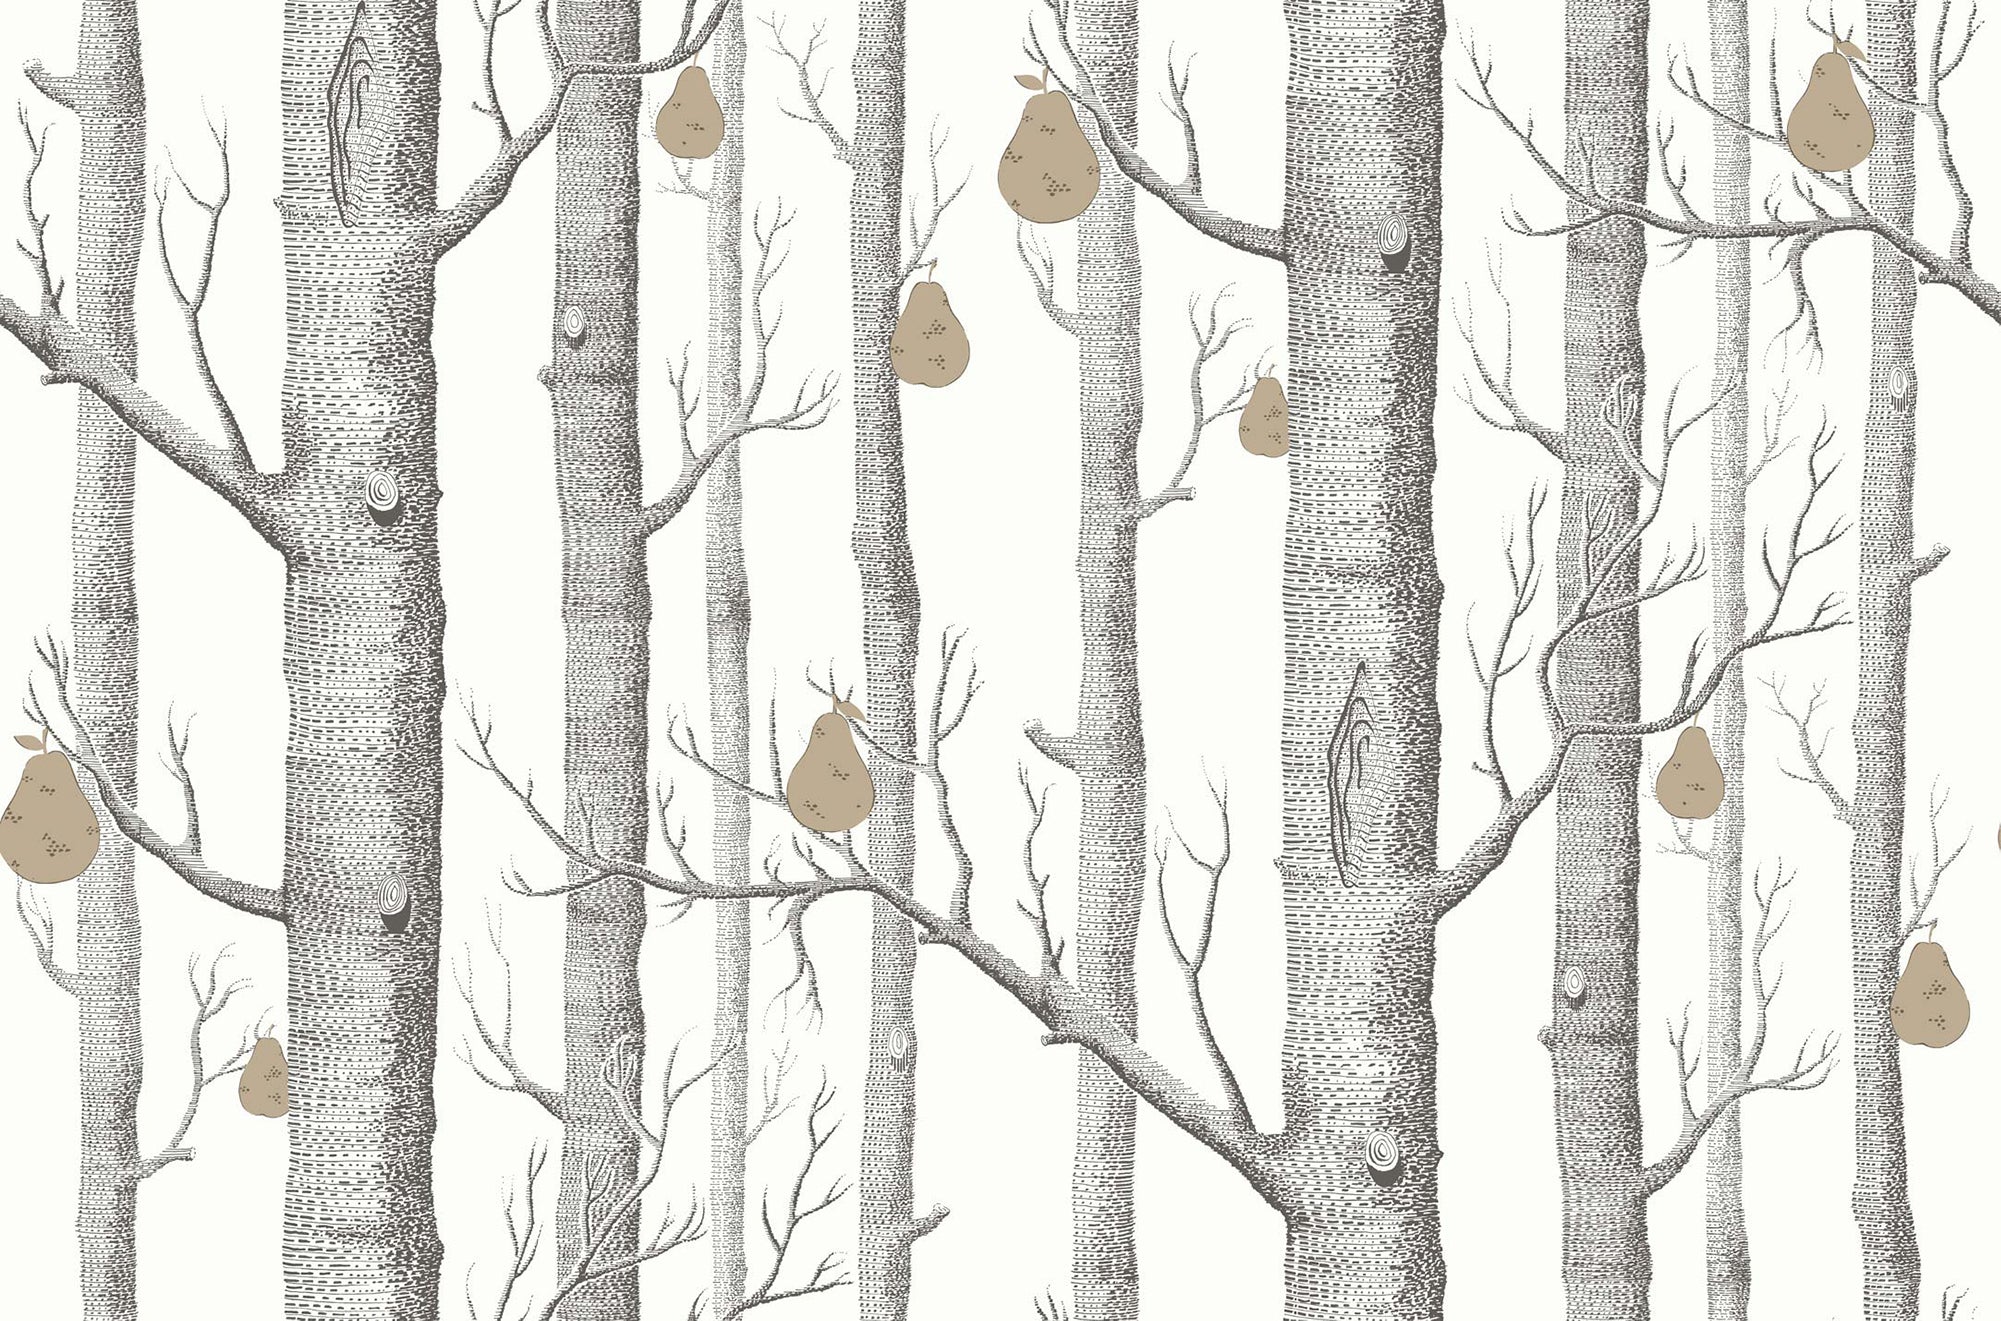 Woods & Pears - Charcoal & Metallic Bronze on Parchment